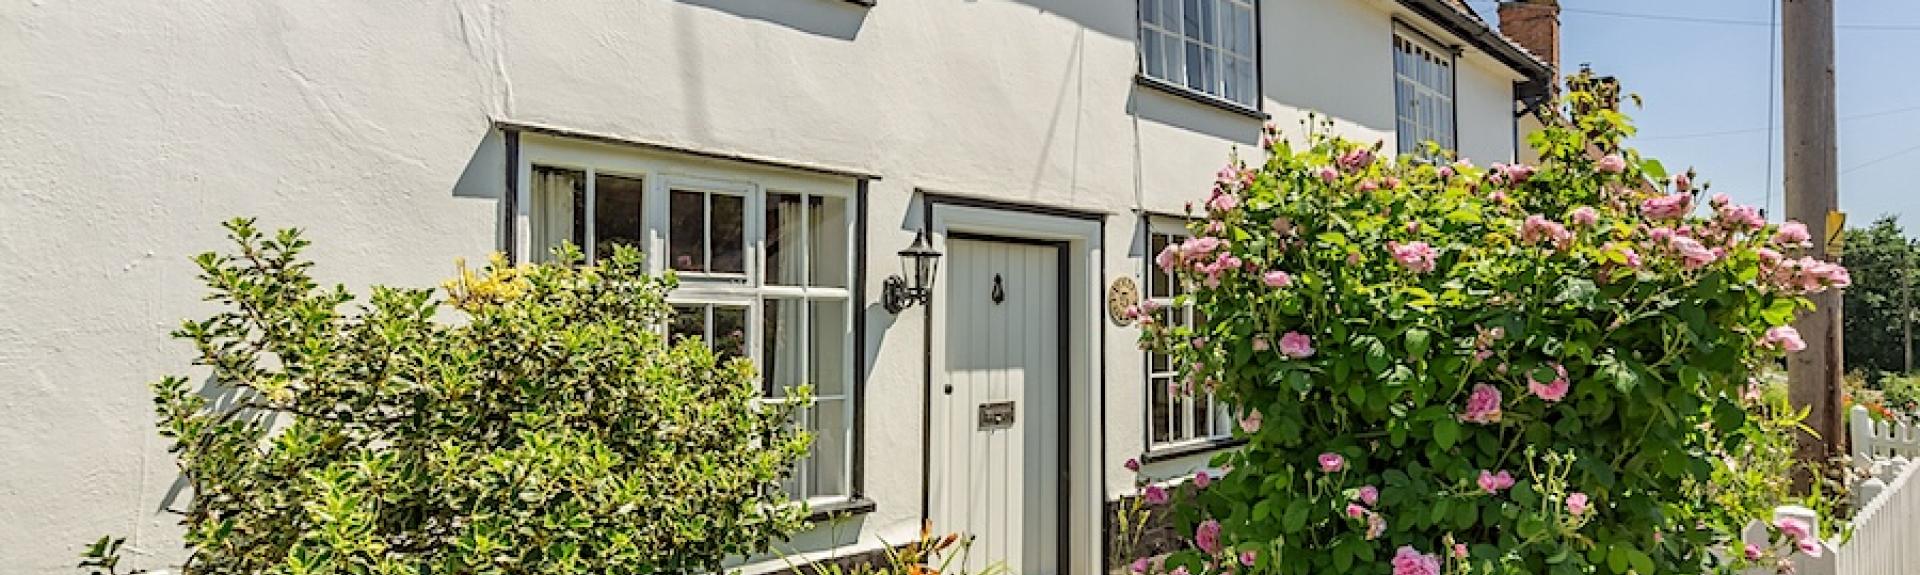 A double-fronted Sussex cottage with a flower-filled front garden behind a low picket fence.